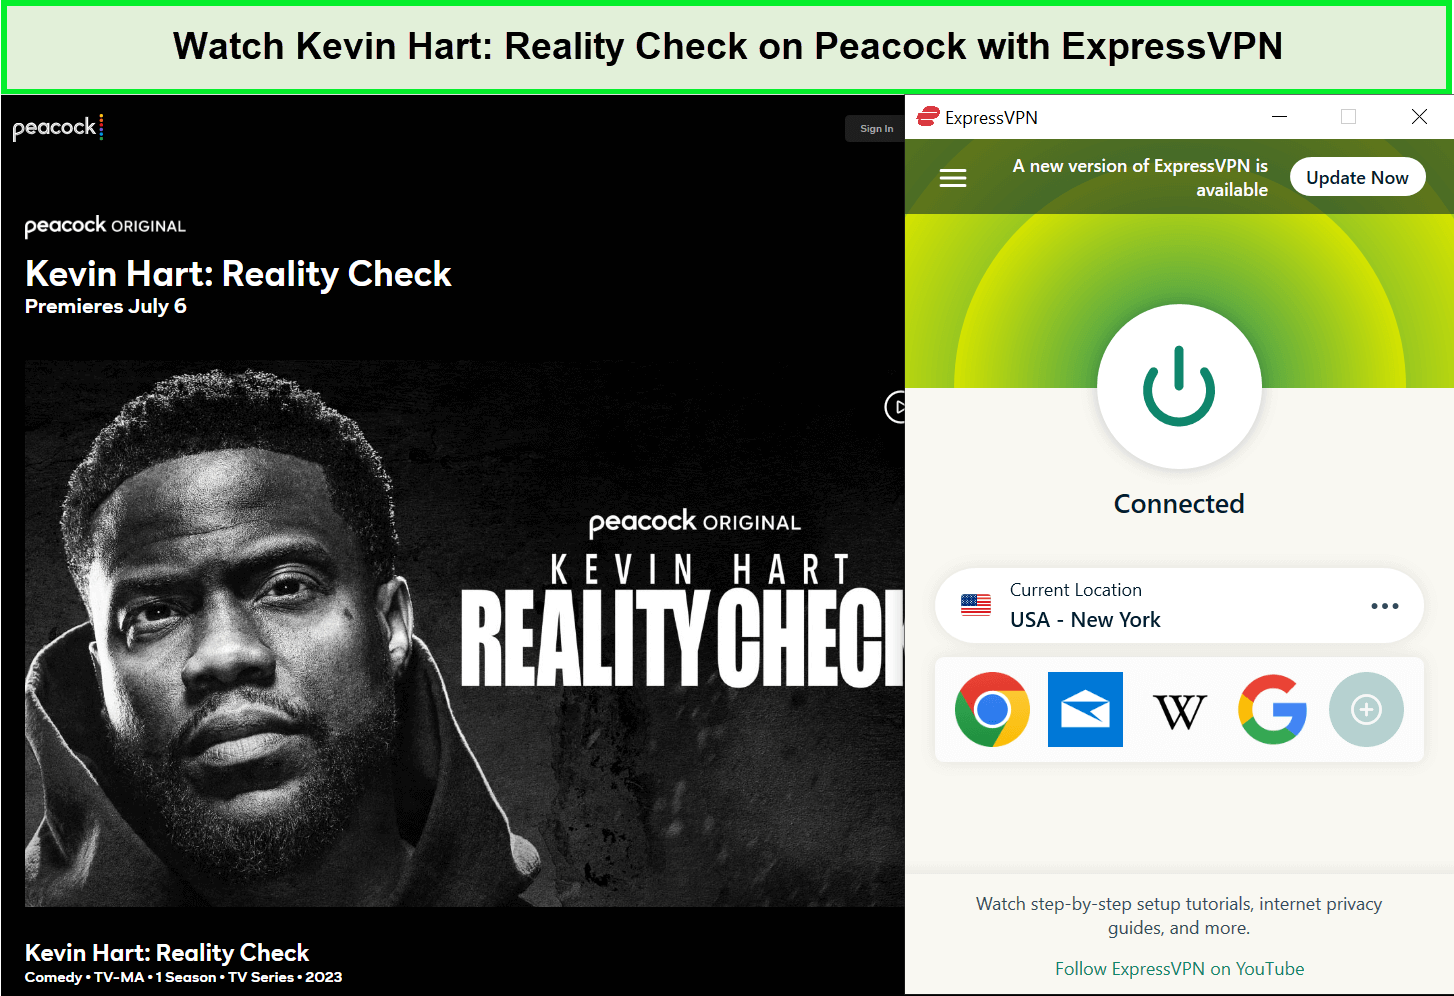 Watch-Kevin-Hart-Reality-Check-in-Japan-on-Peacock-with-ExpressVPN